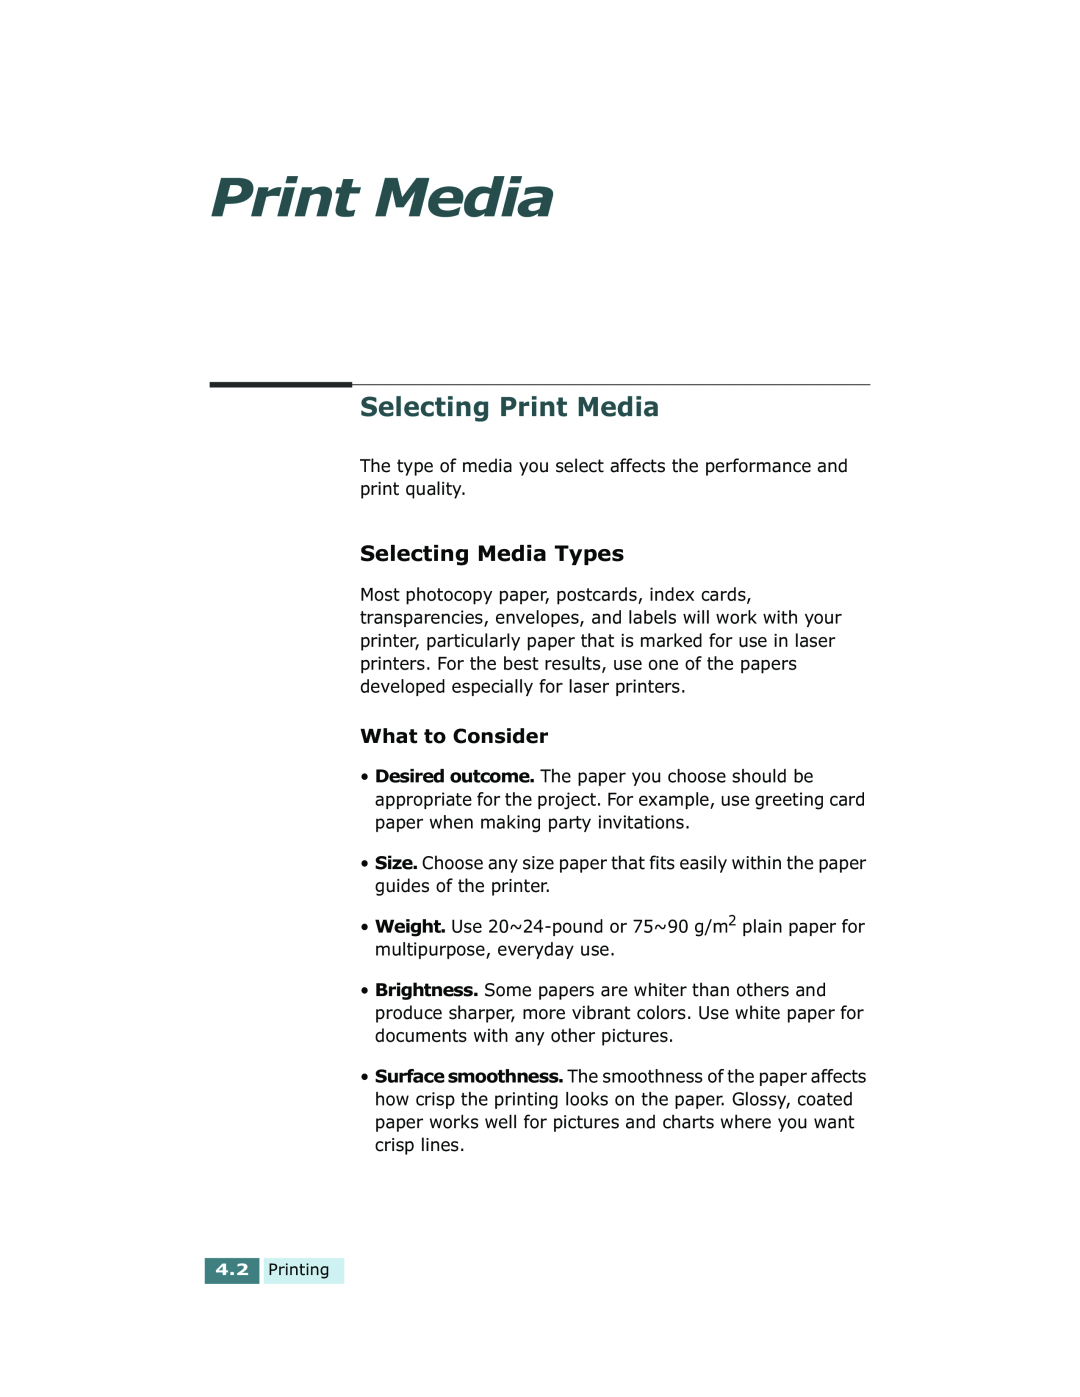 Xerox Pro 580 manual Selecting Print Media, Selecting Media Types, What to Consider 